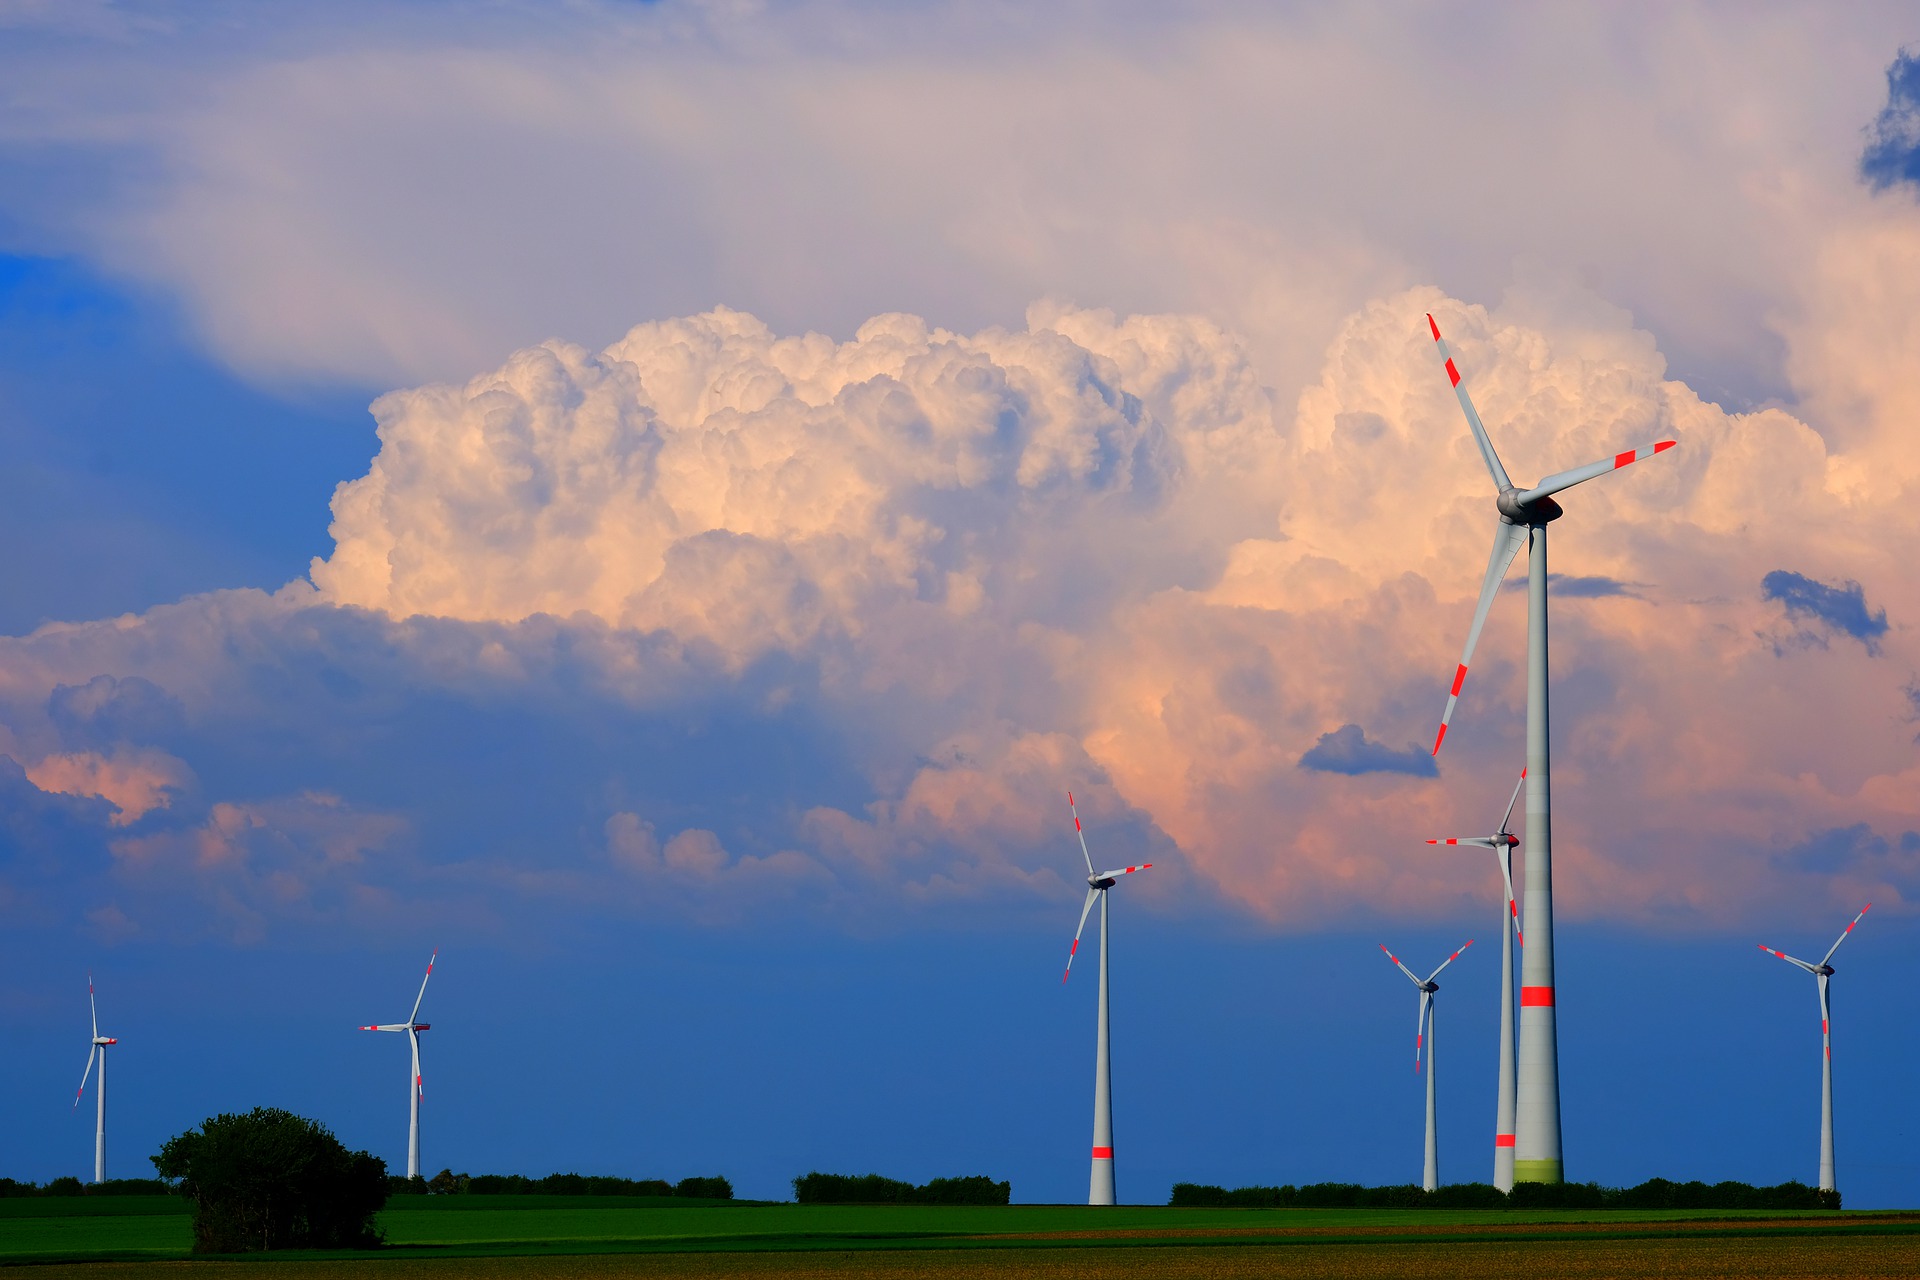 Wind farm planning must adapt to changing climate conditions in the future